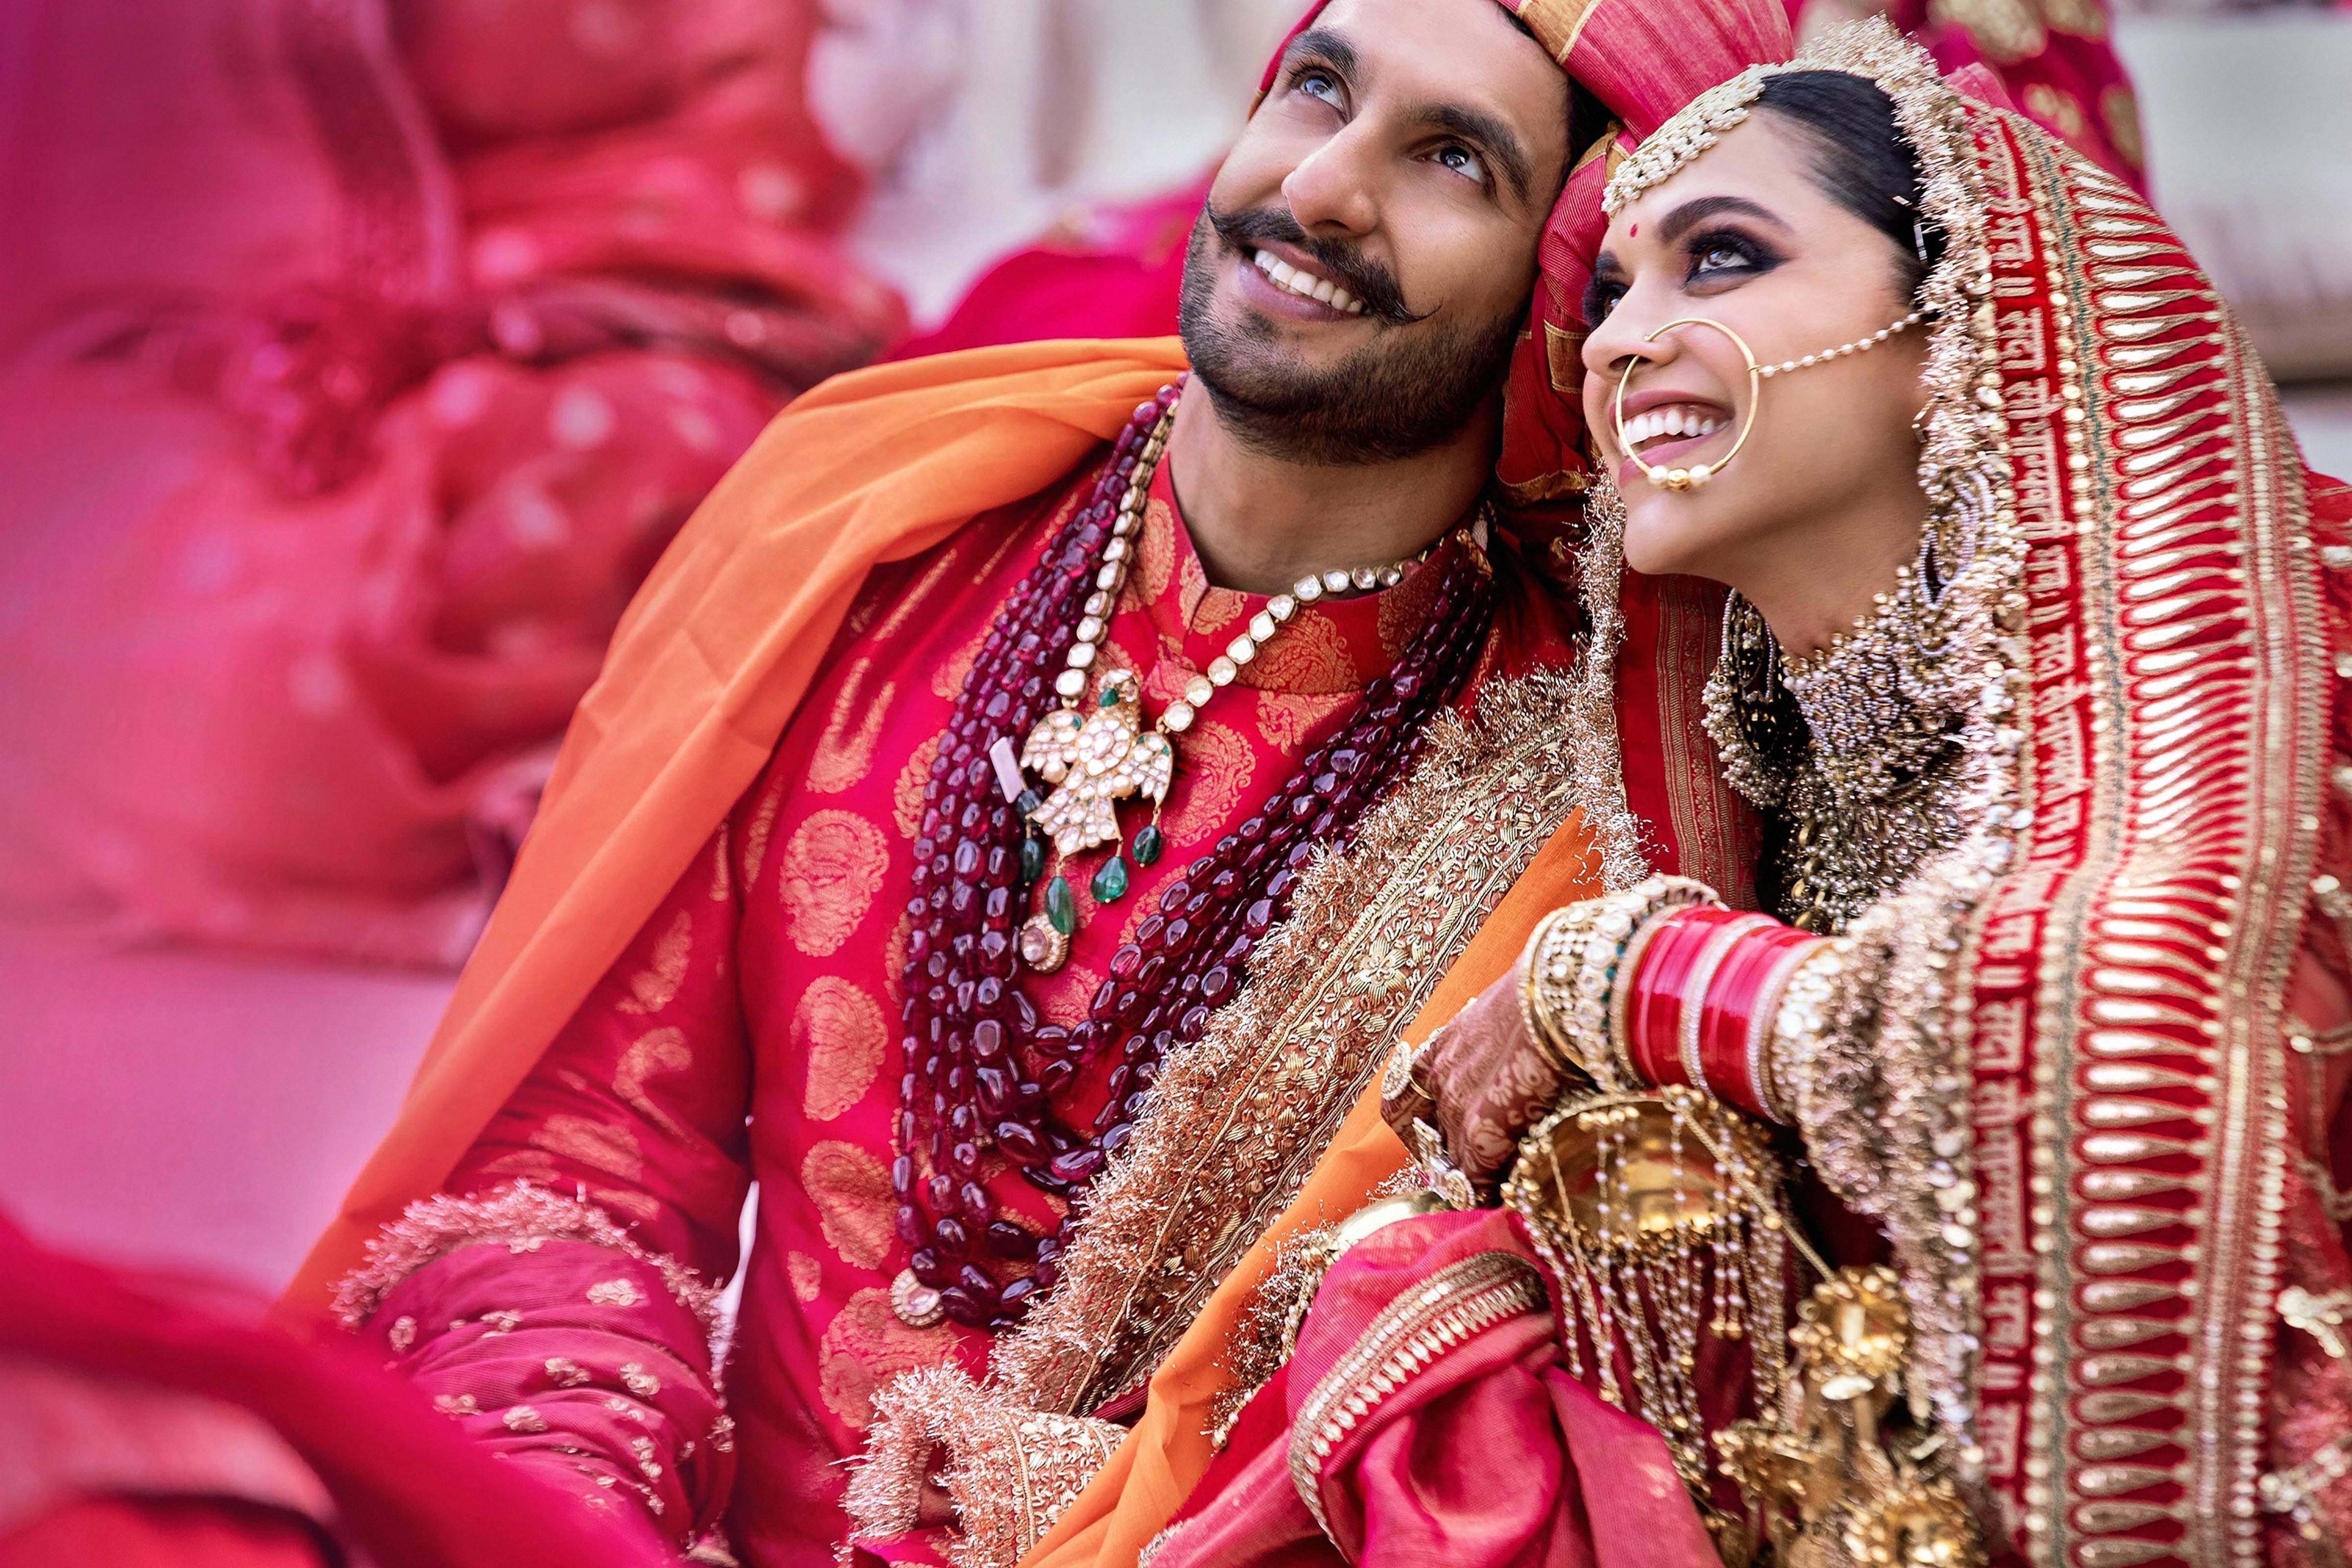 Here Are The Latest Photo From Deepika Padukone Ranveer Singh's Wedding! The New Indian Express